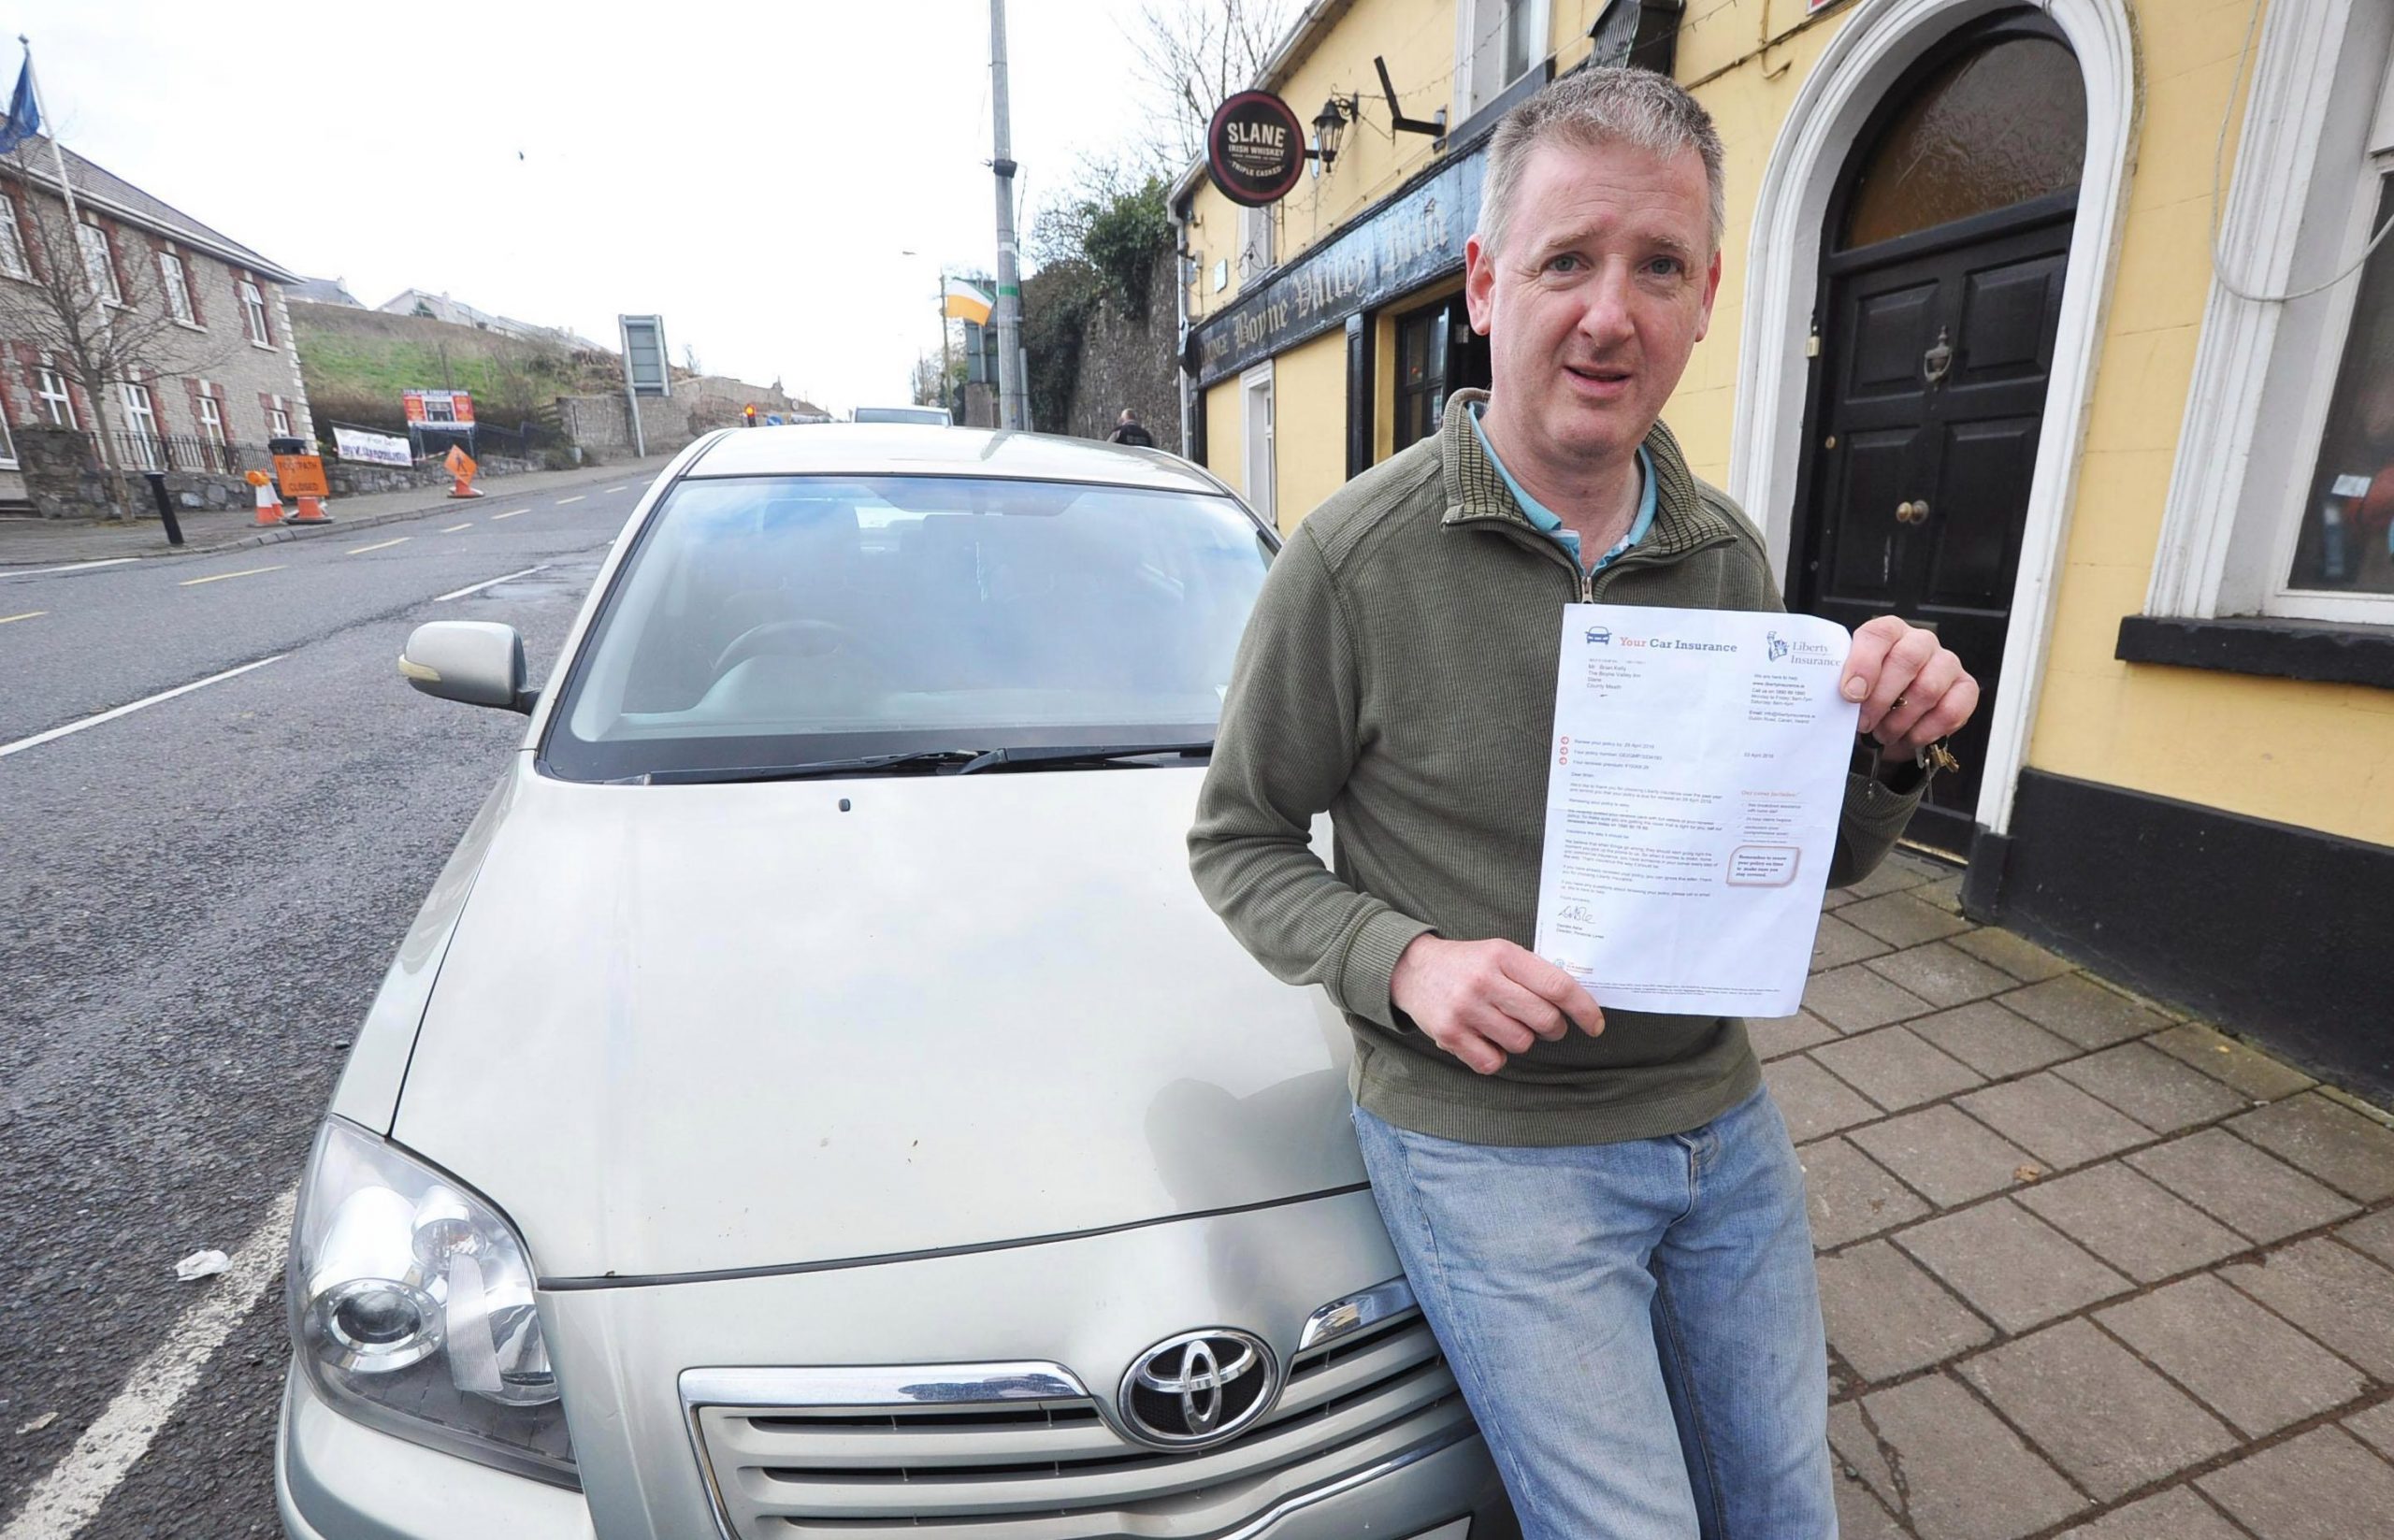 Meath Publican Driven To Despair As Motor Insurance Renewal intended for measurements 2881 X 1854